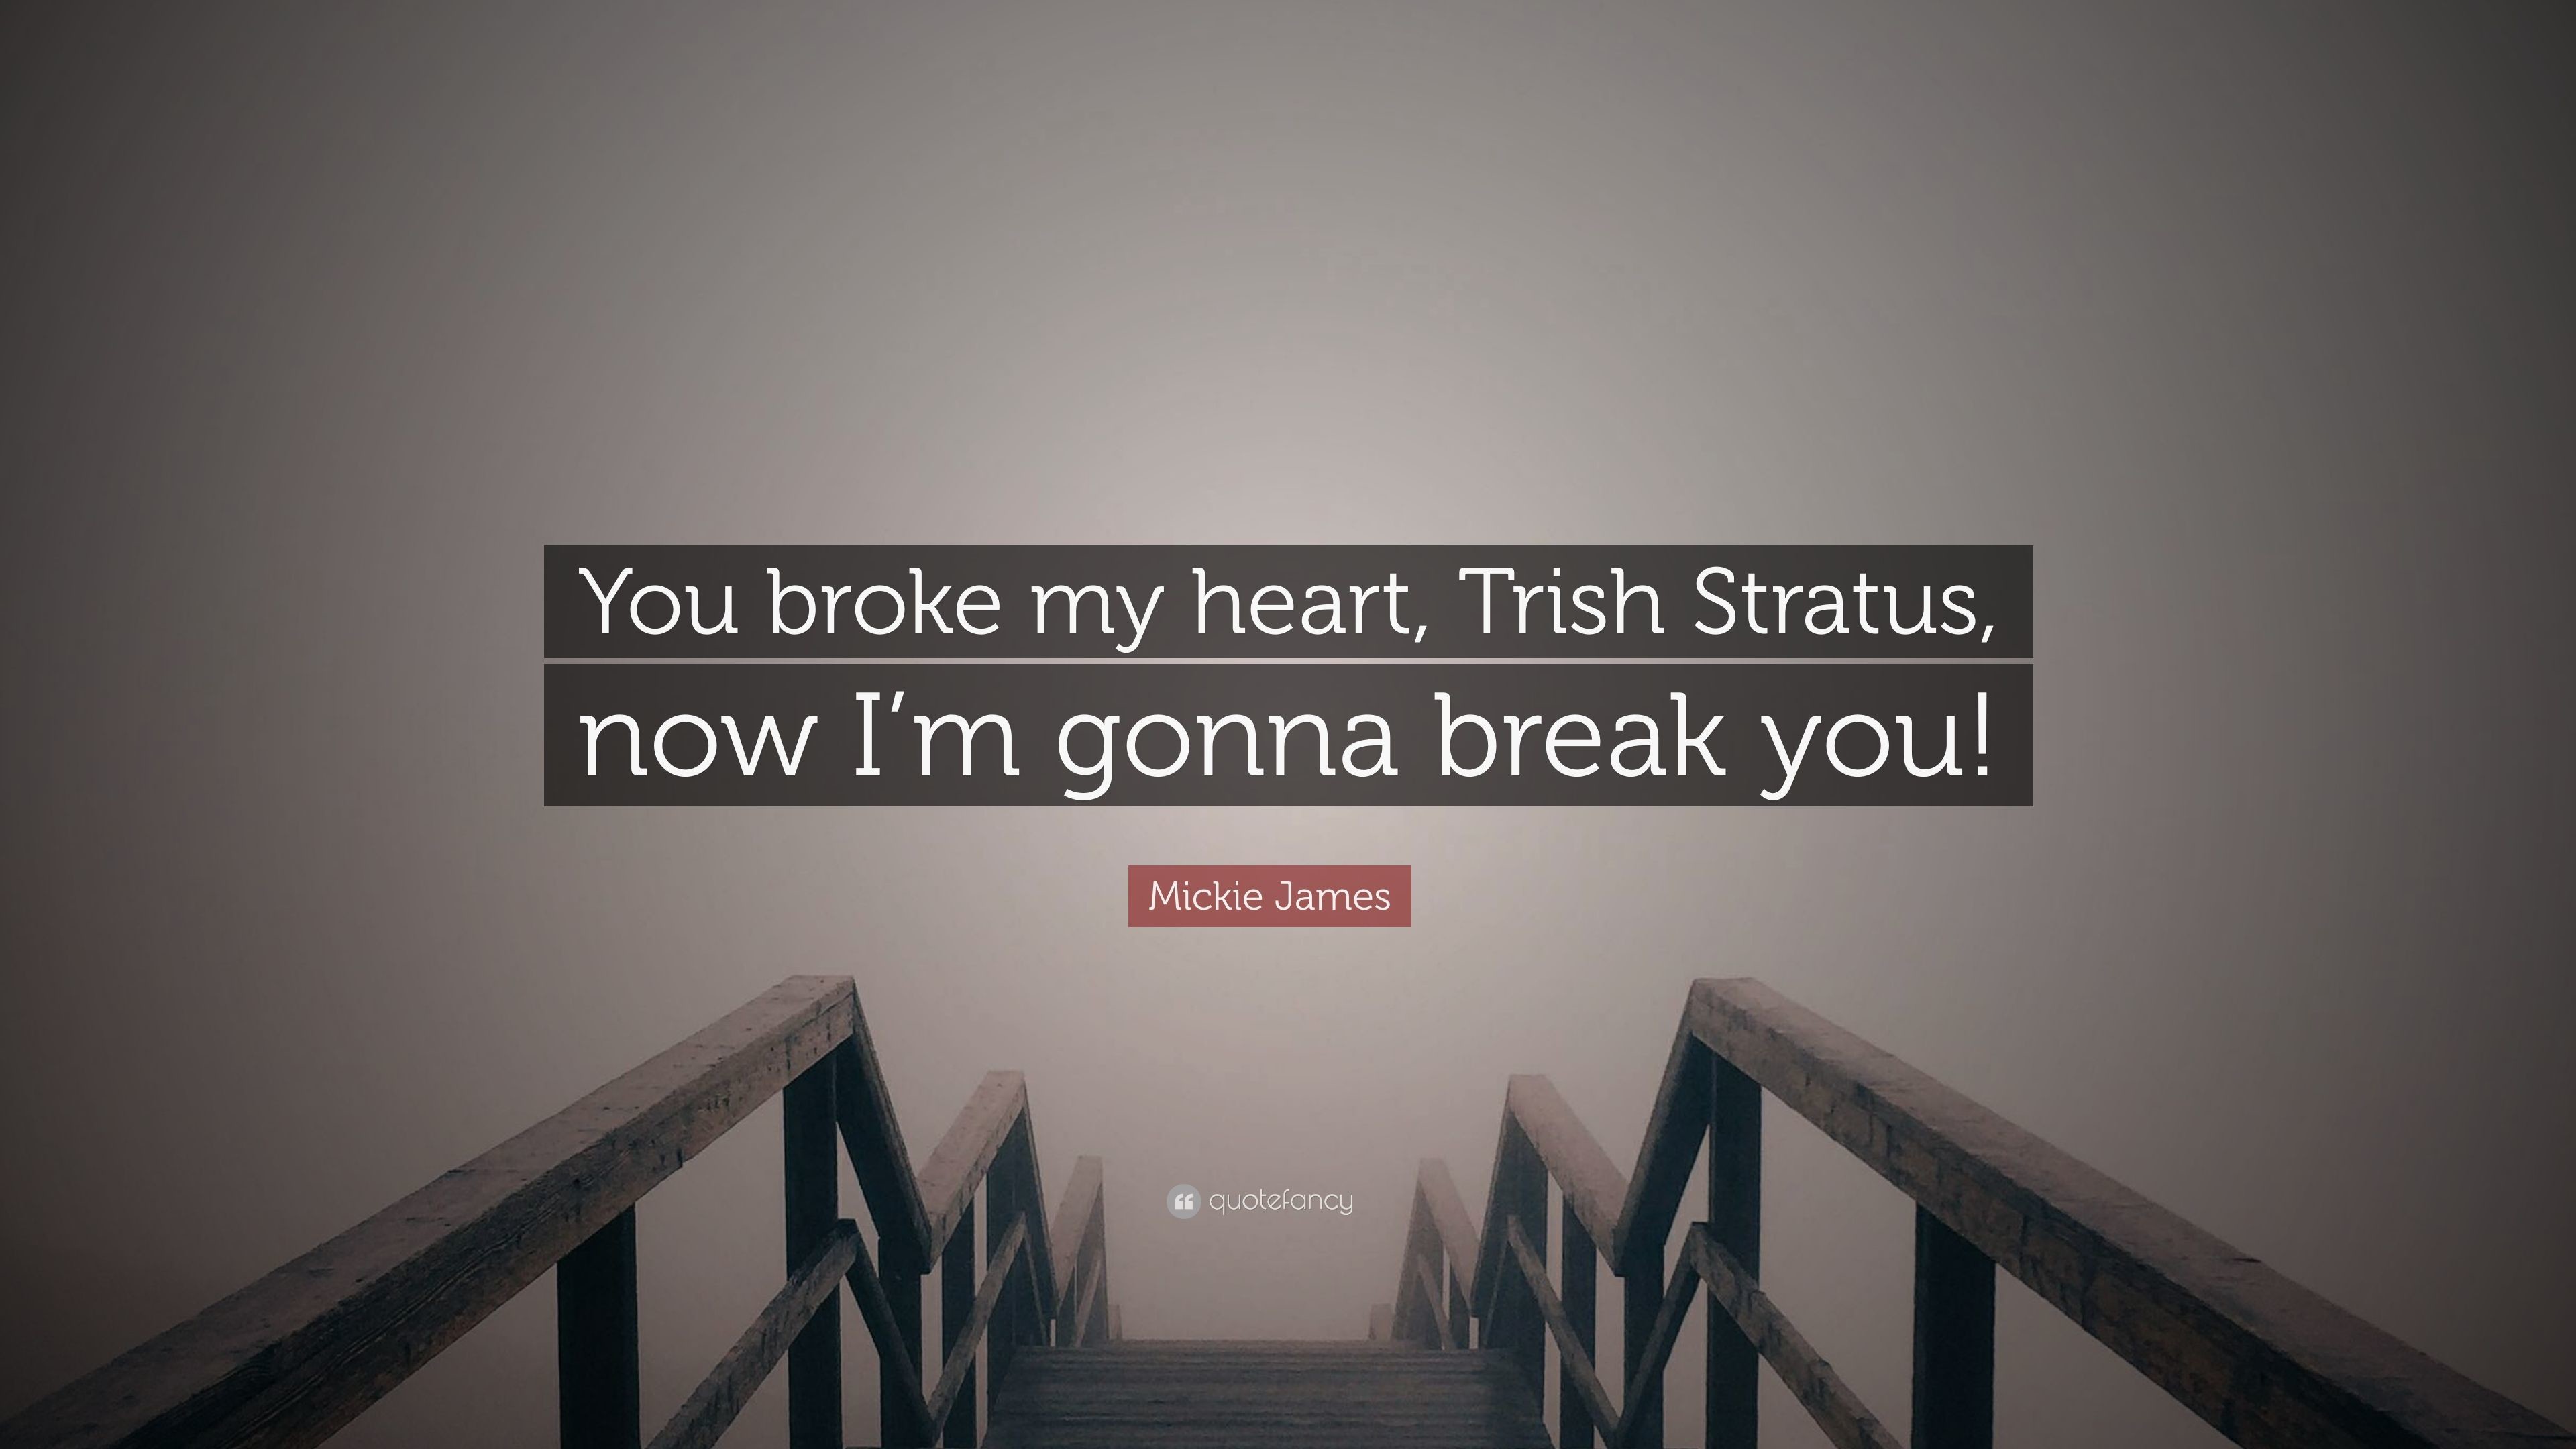 3840x2160 Mickie James Quote: “You broke my heart, Trish Stratus, now I'